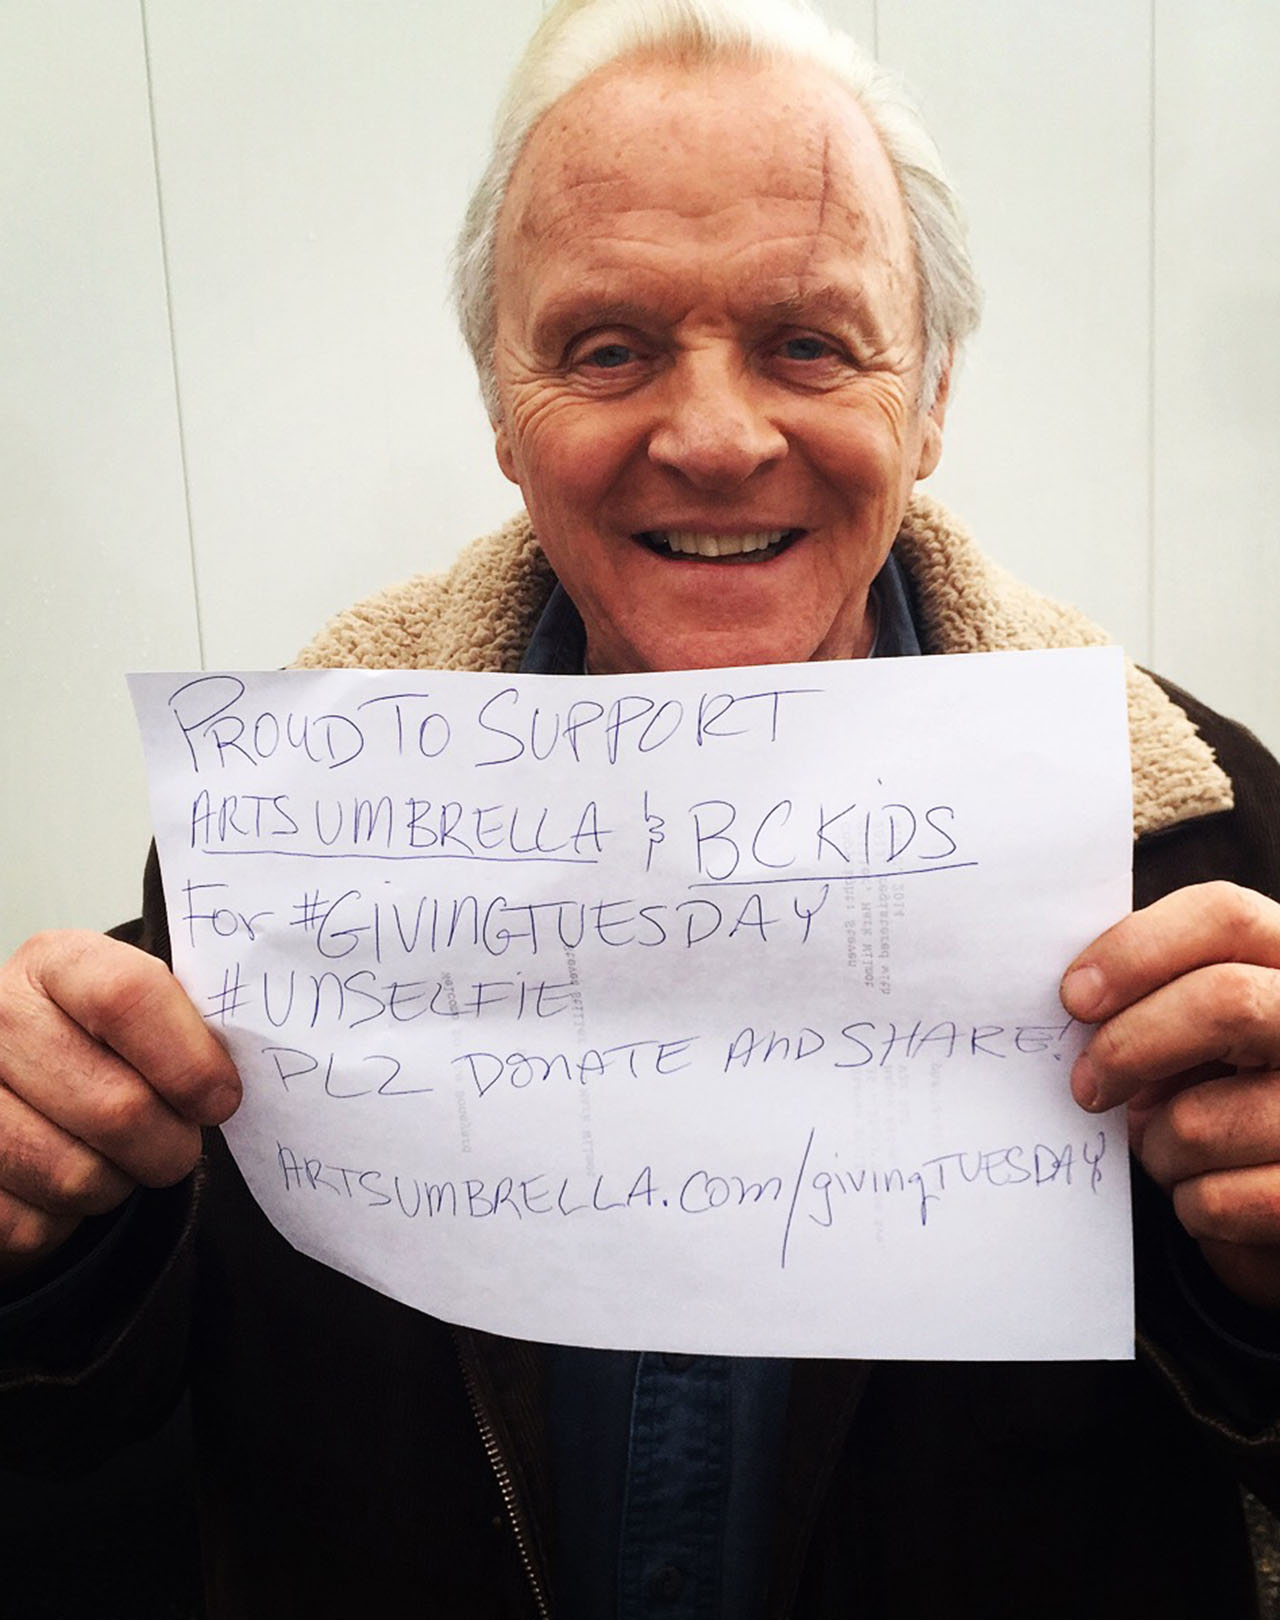 DECEMBER 2014: Local and international celebrities, including Sir Anthony Hopkins (pictured) and Julia Stiles, supported Arts Umbrella for #GivingTuesday. Celebrities took to social media to raise funds for Arts Umbrella’s free-of-charge community programs. “The arts have made an incredible impact on my life and being able to give back is a great feeling,” said actor Aleks Paunovic. “It’s a great cause worthy of our support.”